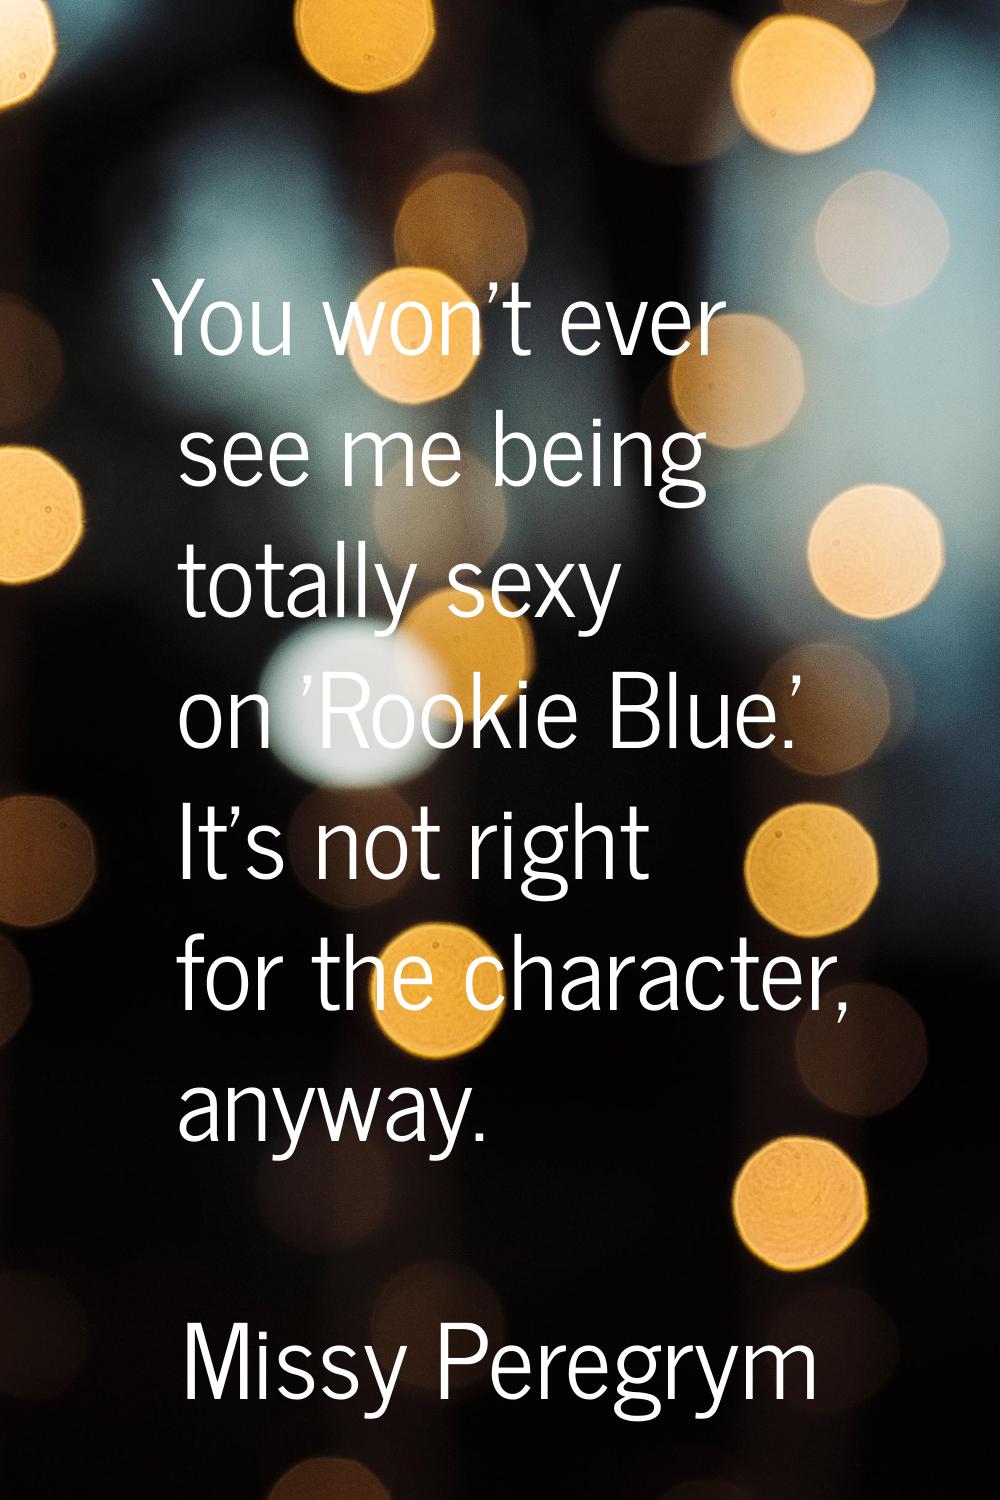 You won't ever see me being totally sexy on 'Rookie Blue.' It's not right for the character, anyway